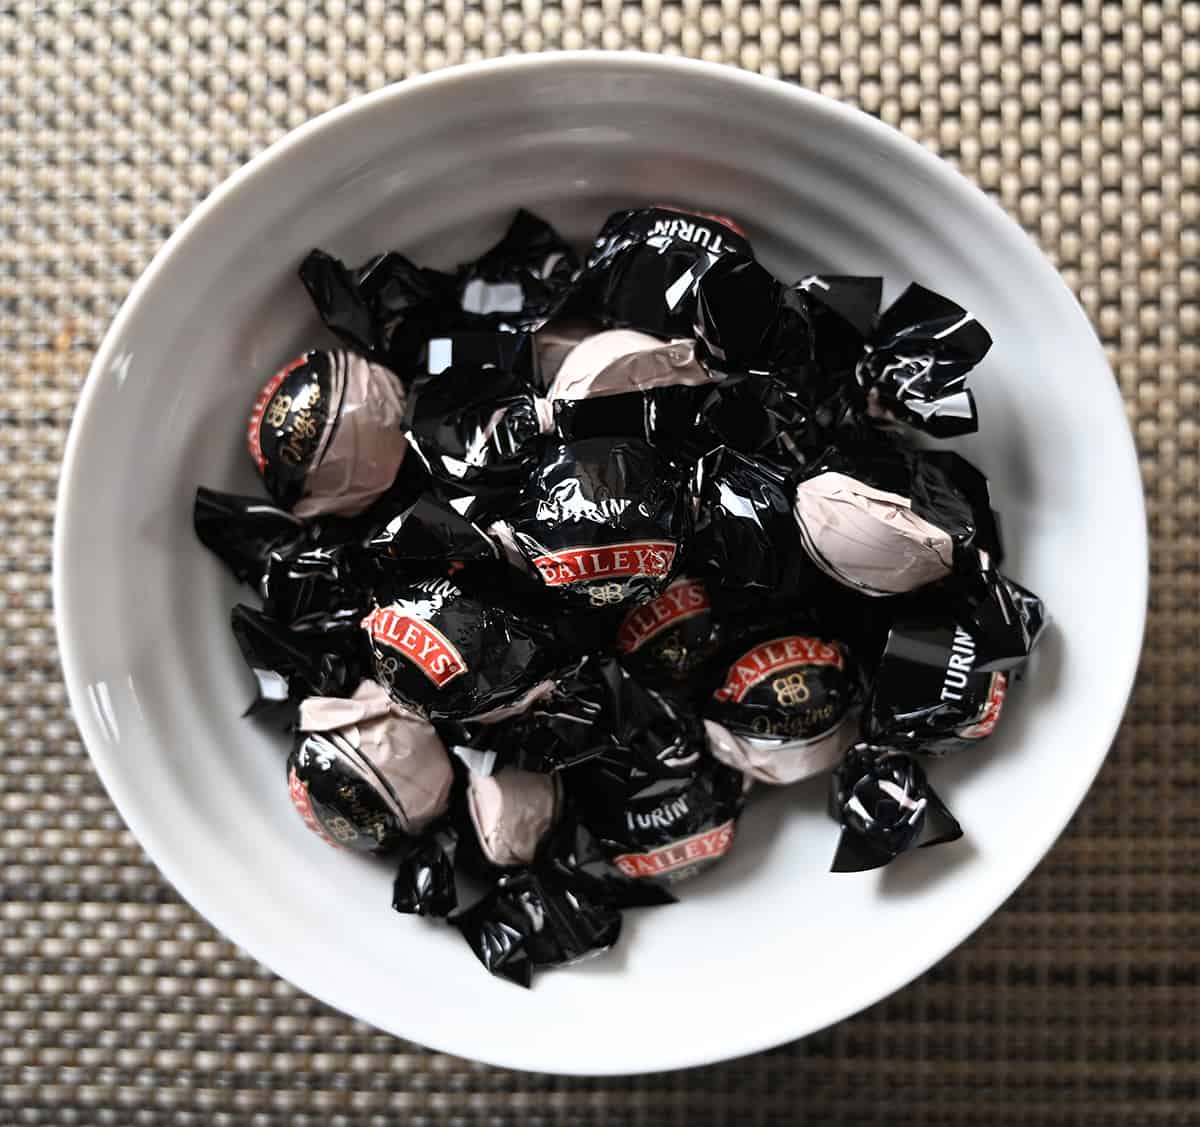 Top down image of a bowl of Baileys chocolates in their wrappers.